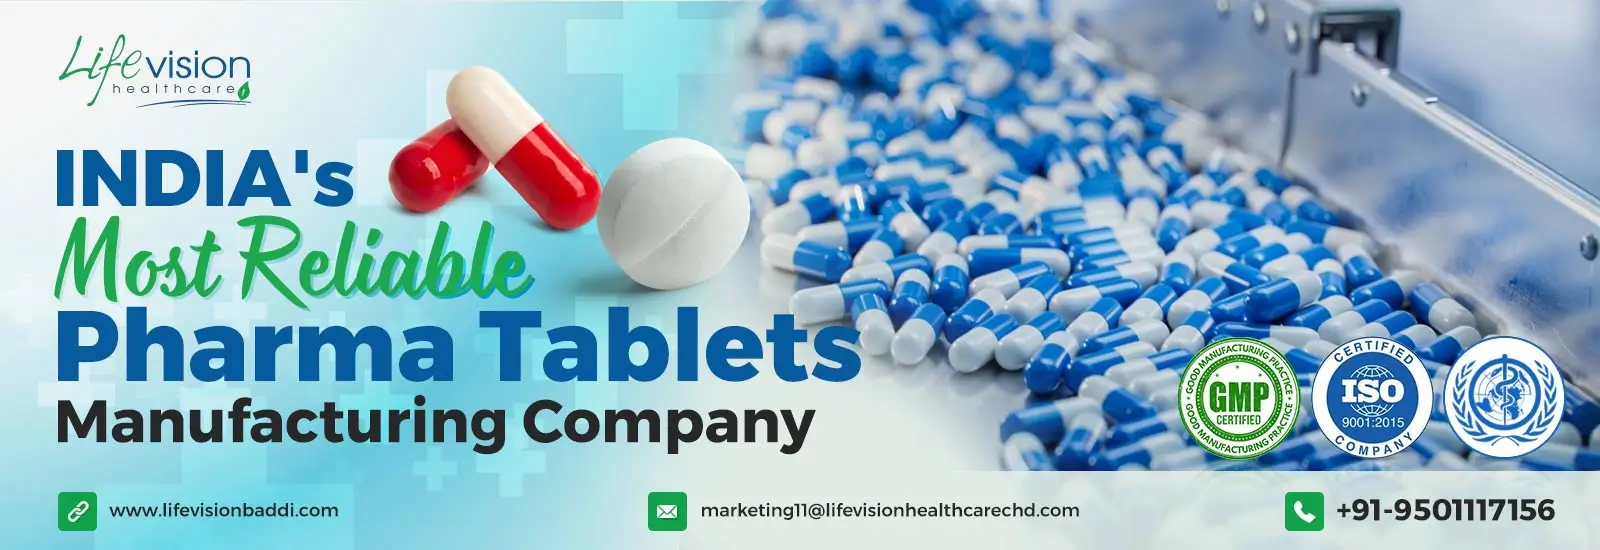 Lifevision Healthcare, Count as Top among the Premier Pharma Tablets Manufacturers in India | Lifevision Healthcare